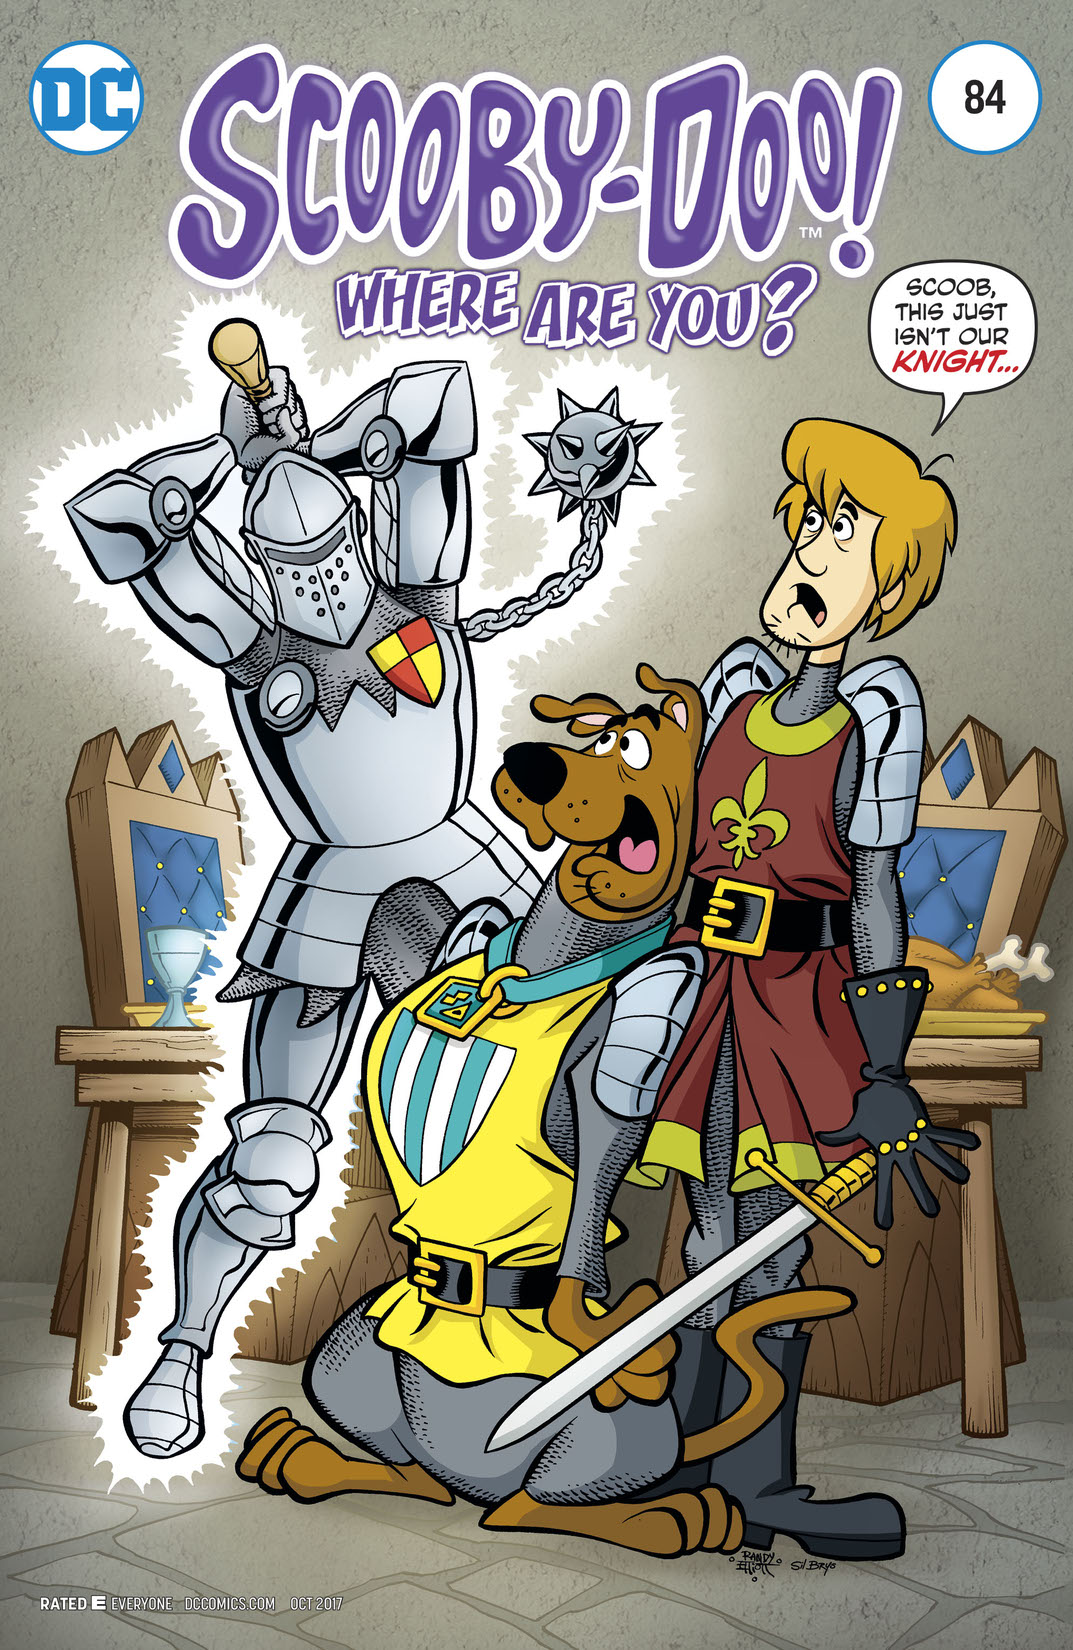 Scooby-Doo, Where Are You? #84 preview images